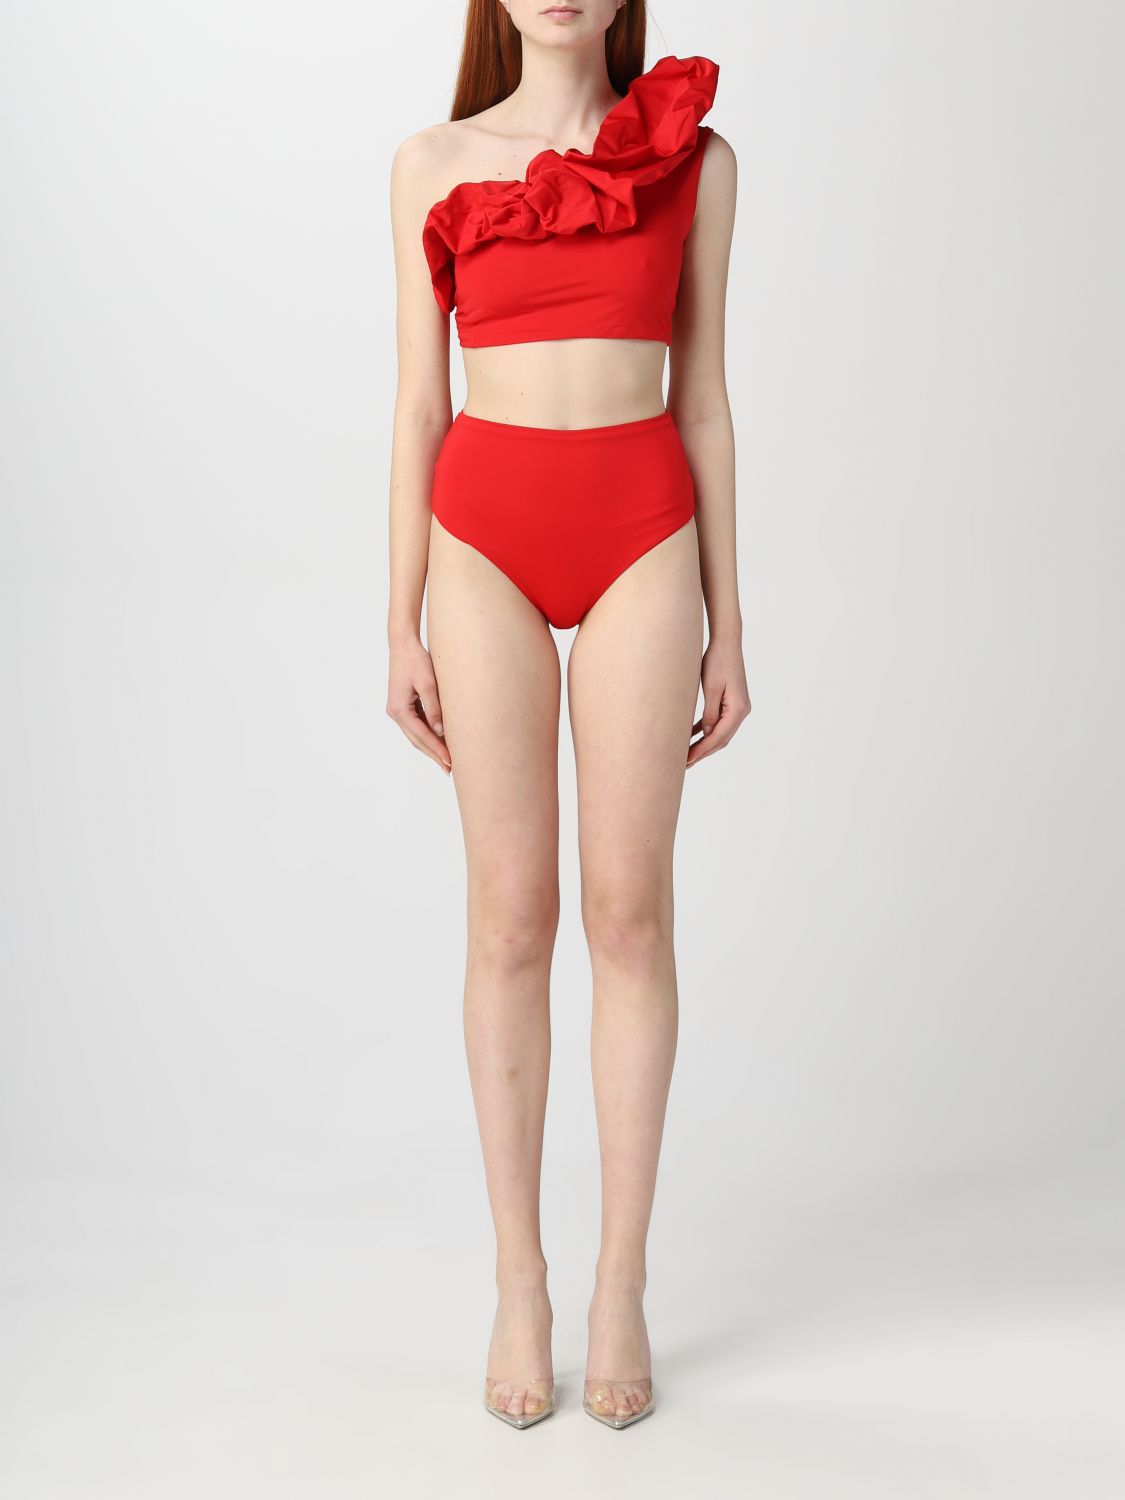 MAYGEL CORONEL SWIMSUIT MAYGEL CORONEL WOMAN COLOR RED,383459014